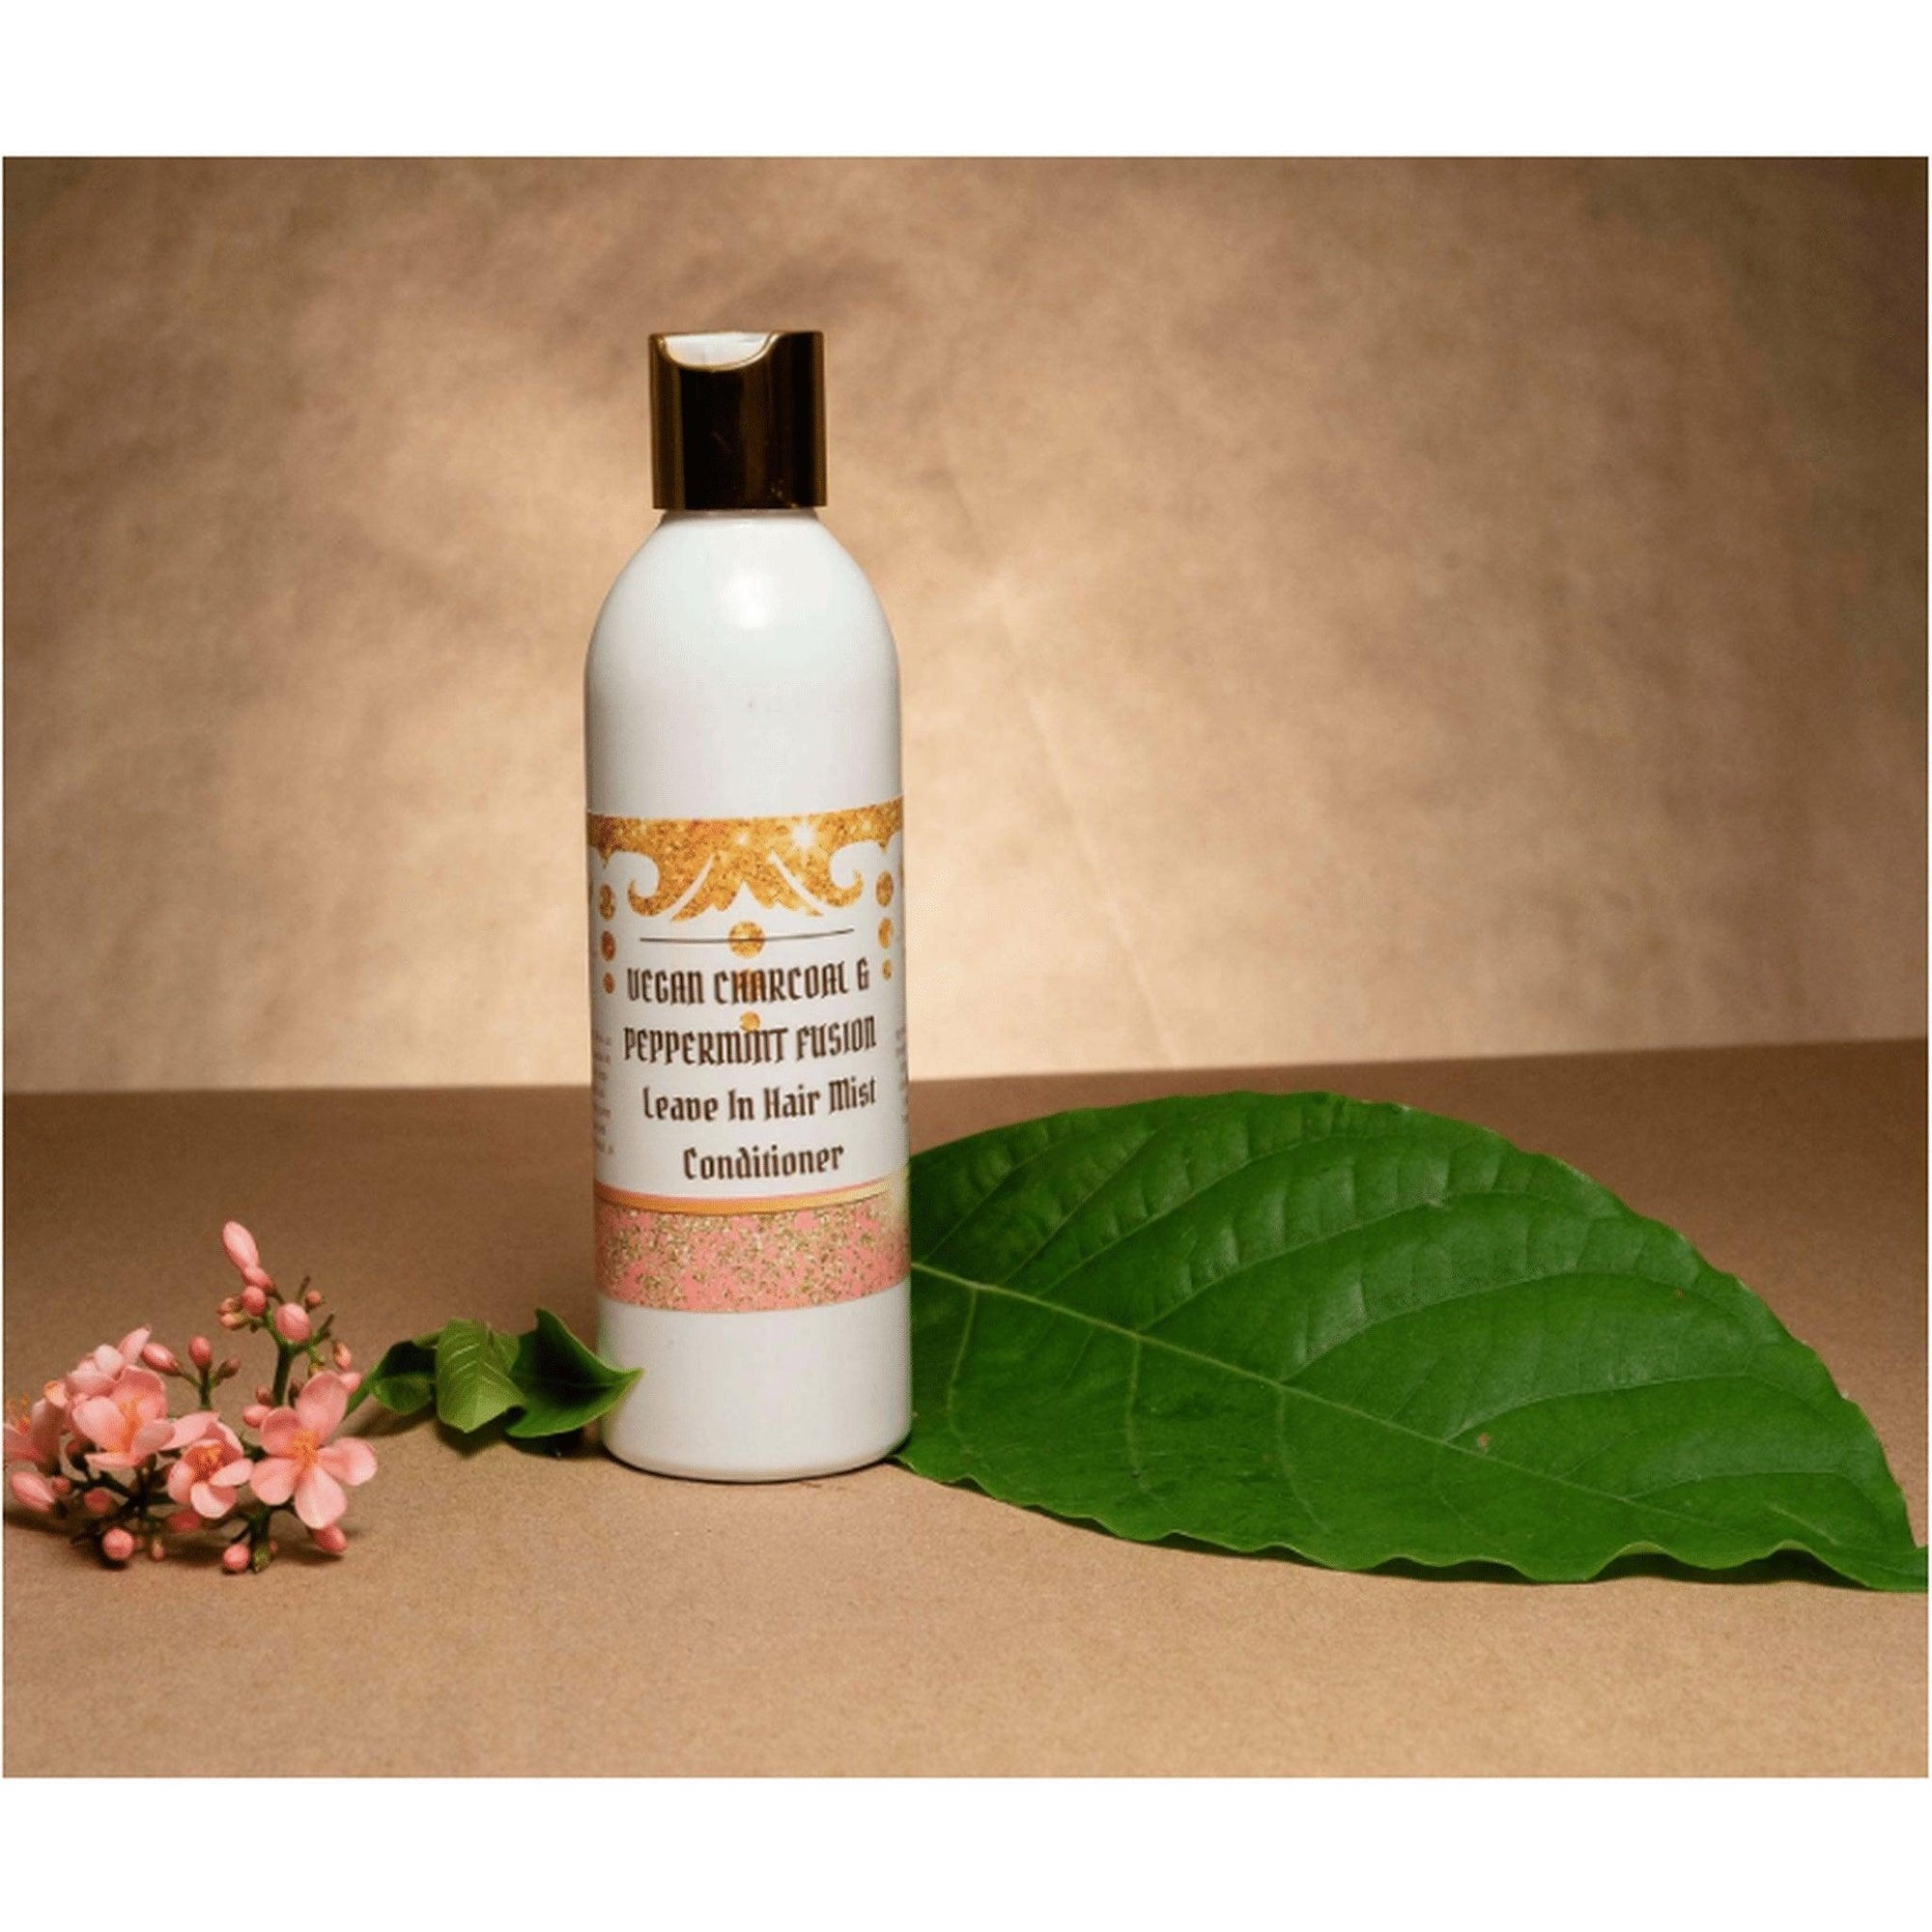 Vegan Charcoal Peppermint Fusion Leave-in Conditioner - RoyalLuxsLLC